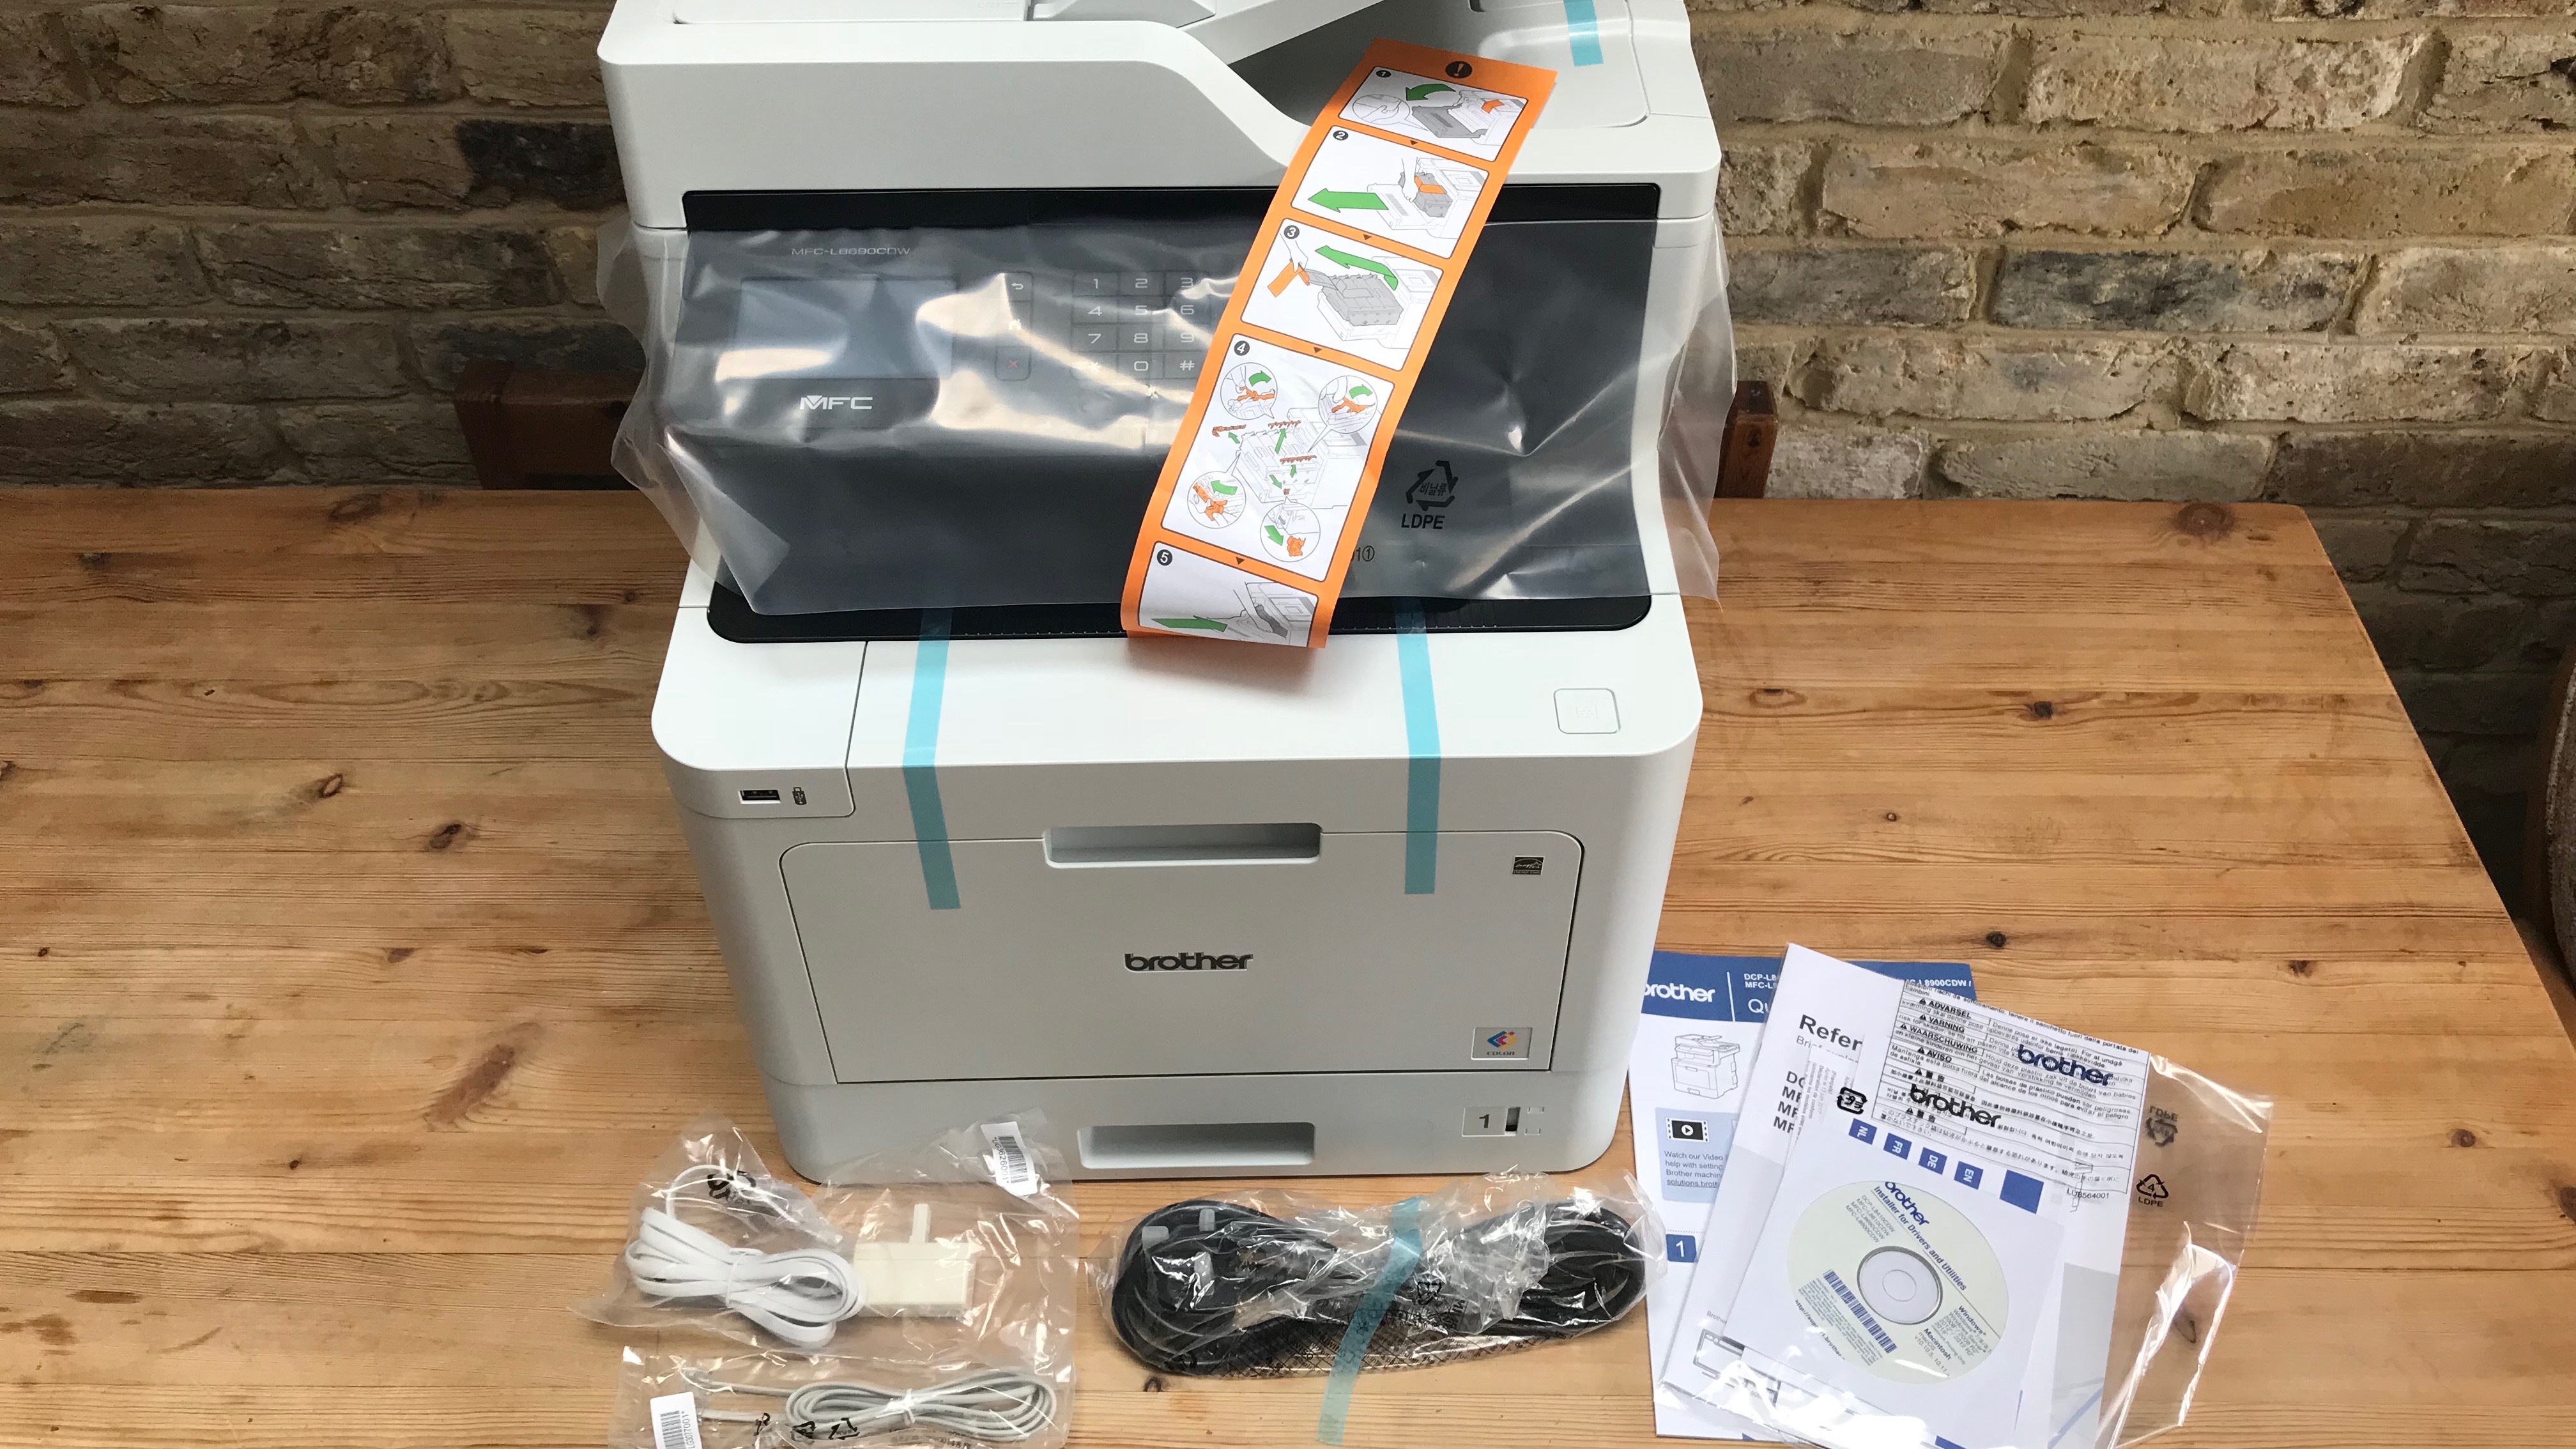 Printer with acessories